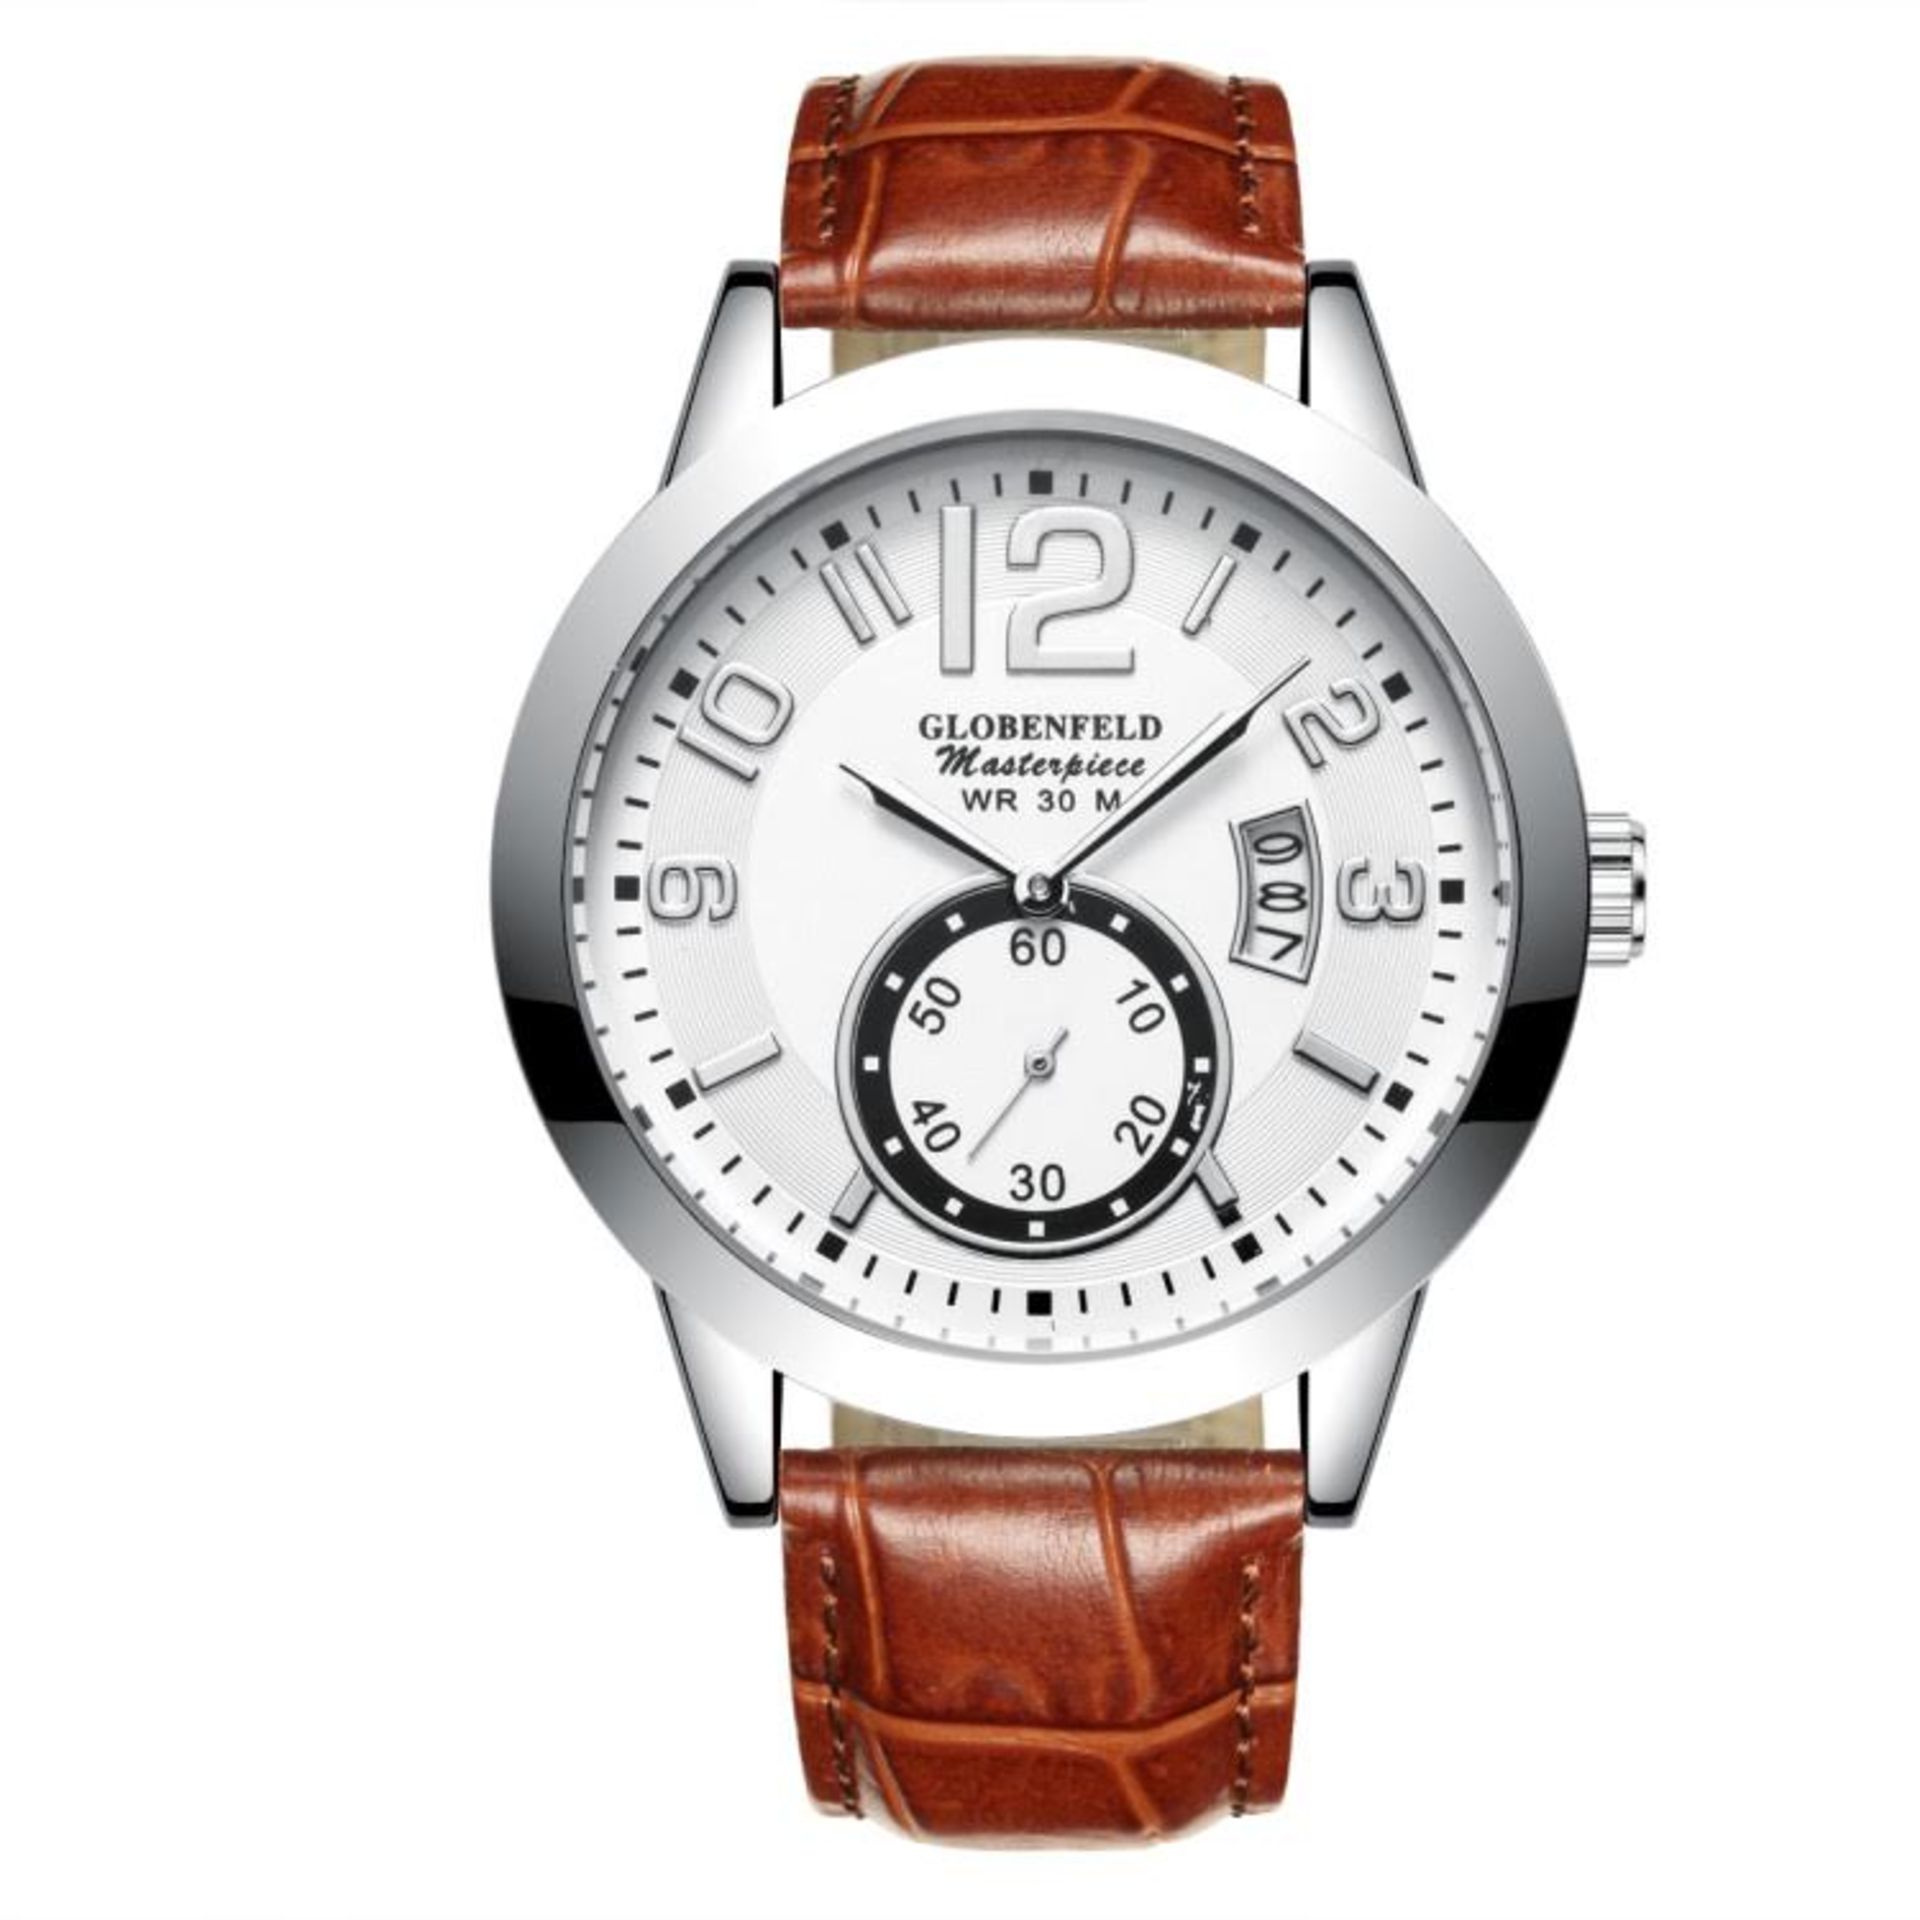 V Brand New Gents Globenfeld Masterpiece White Face - Brown Leather Strap With Box and Papers RRP £